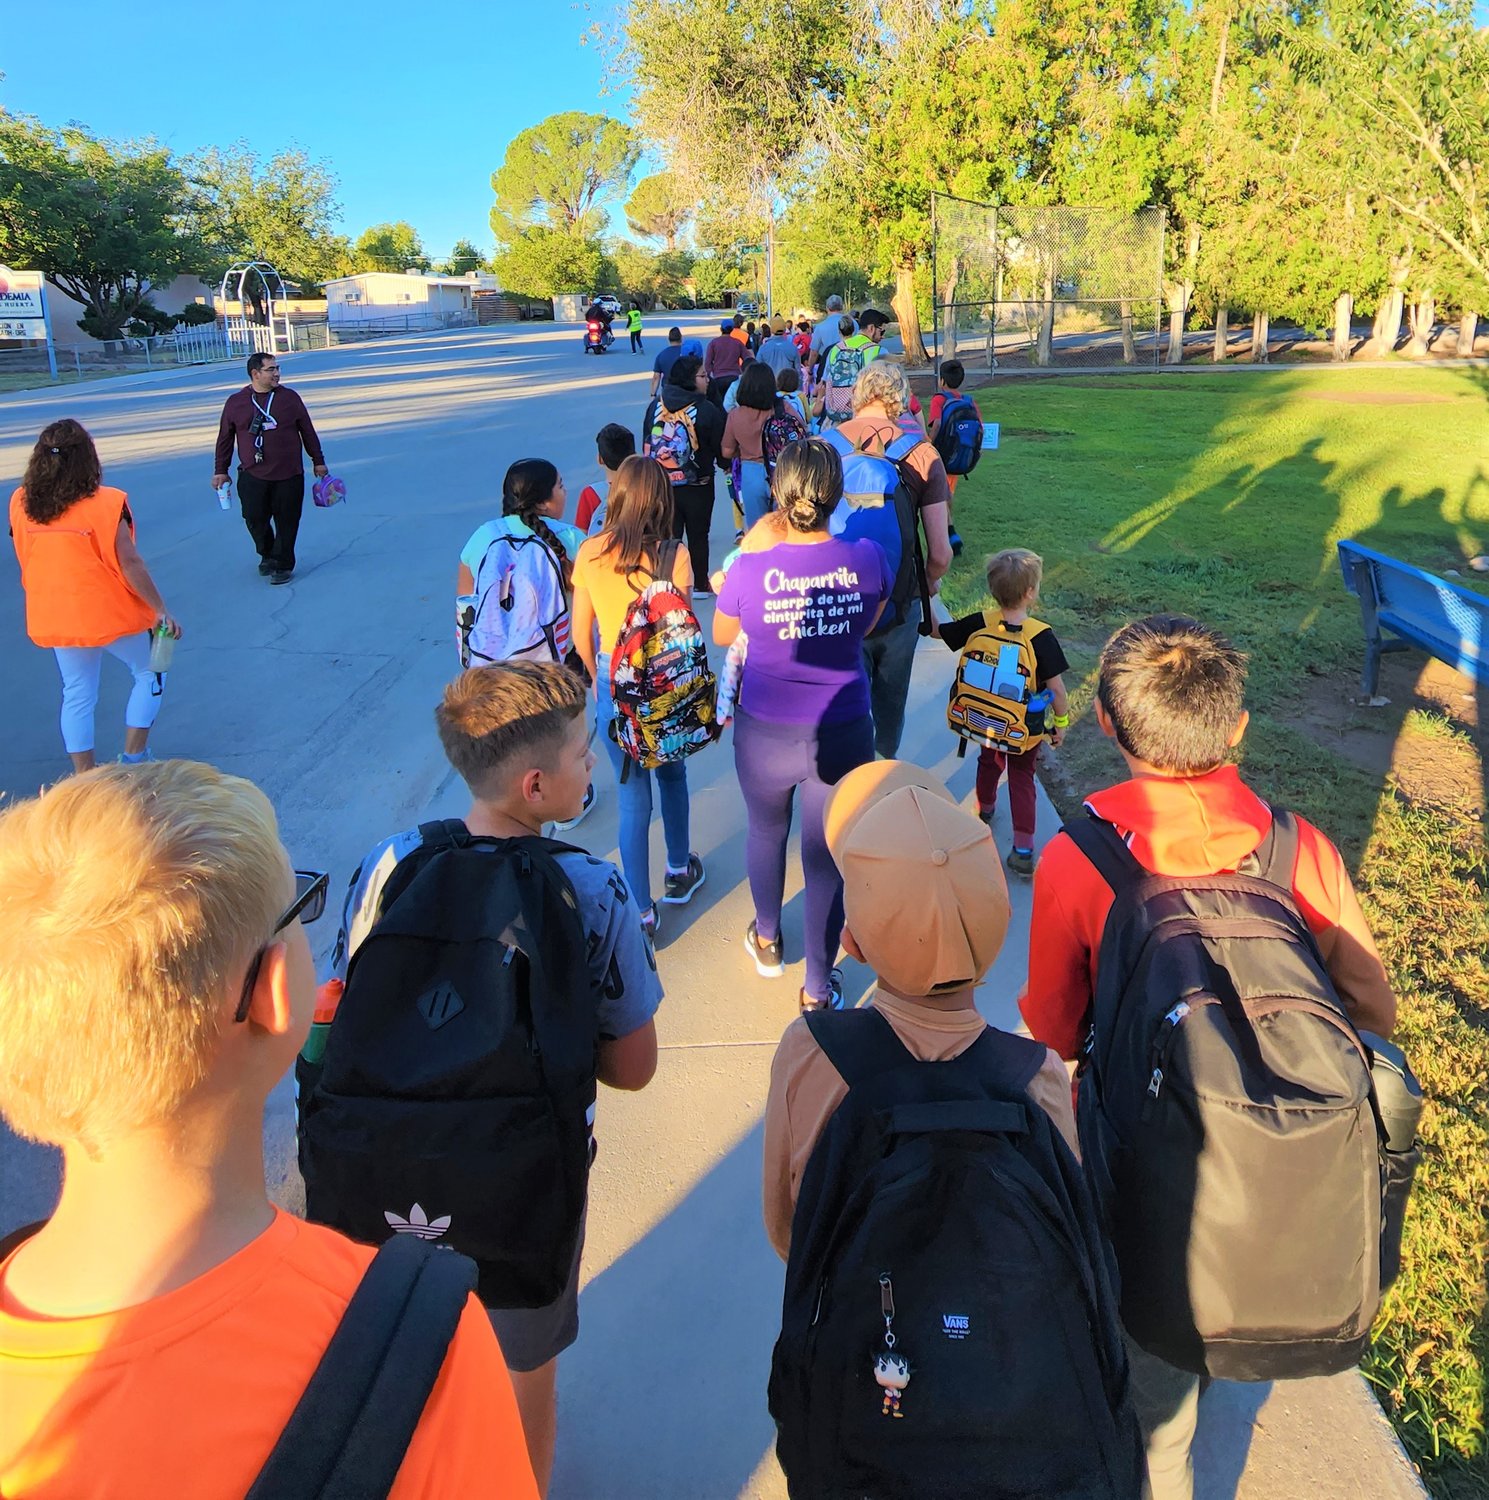 Mesilla Park Elementary School’s Sept. 22 International Walk to School Day Celebration included hundreds of students, staff members, parents and visitors, including Las Cruces Public Schools Foundation members Greg Smith, Grady Oxford and Stacie Allen.